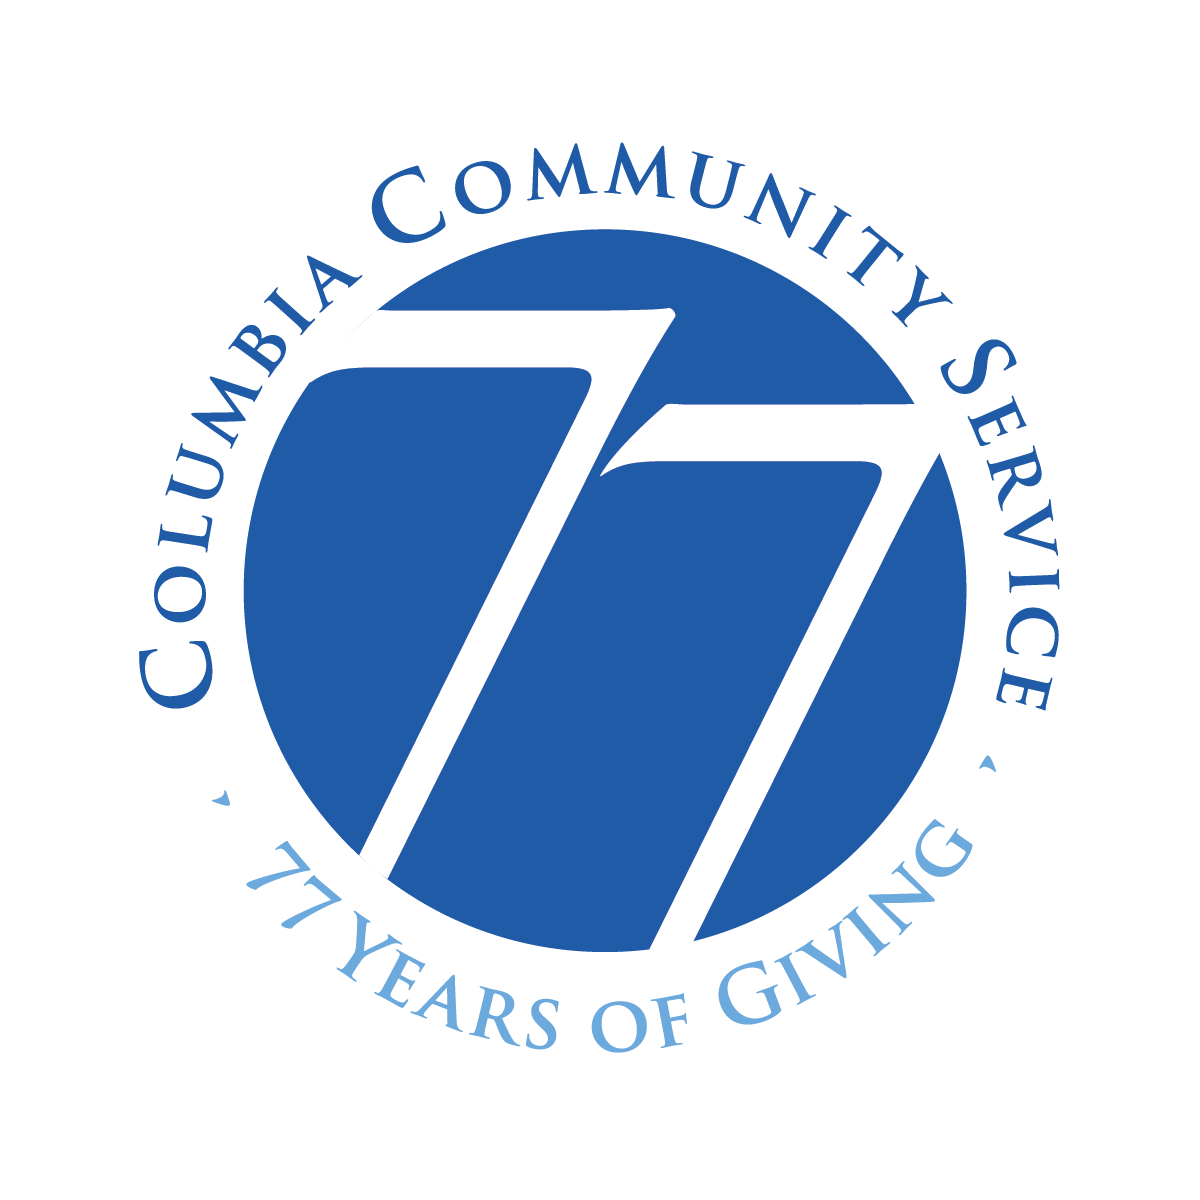 Columbia Community Service: 77 Years of Giving